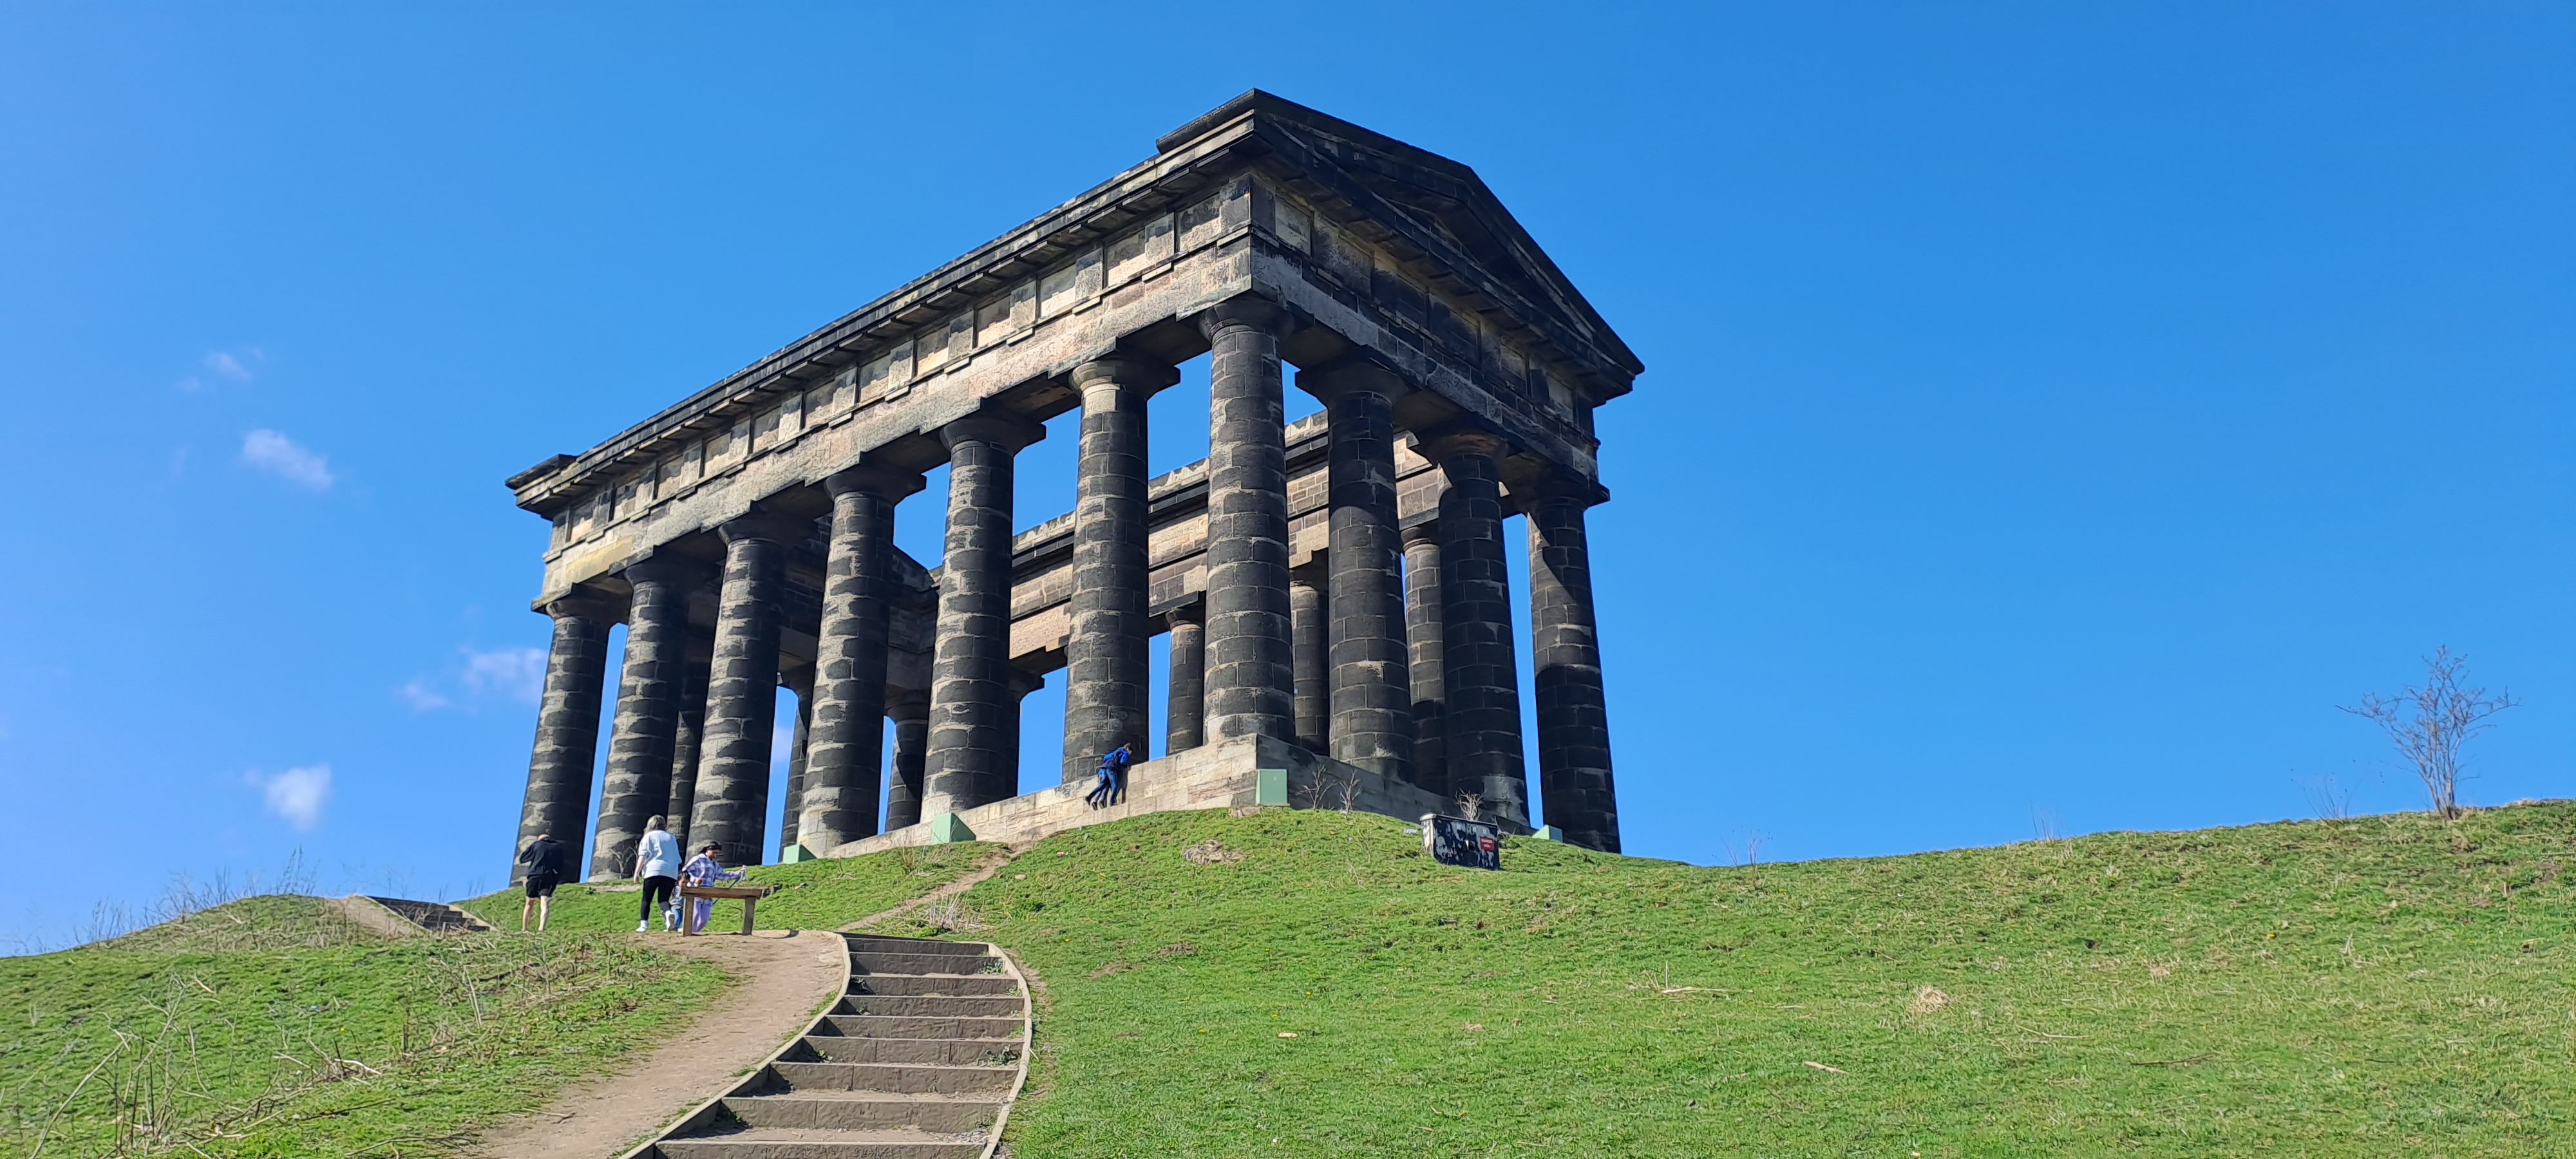 The Penshaw monument: a 19th-century recreation of a Greek temple